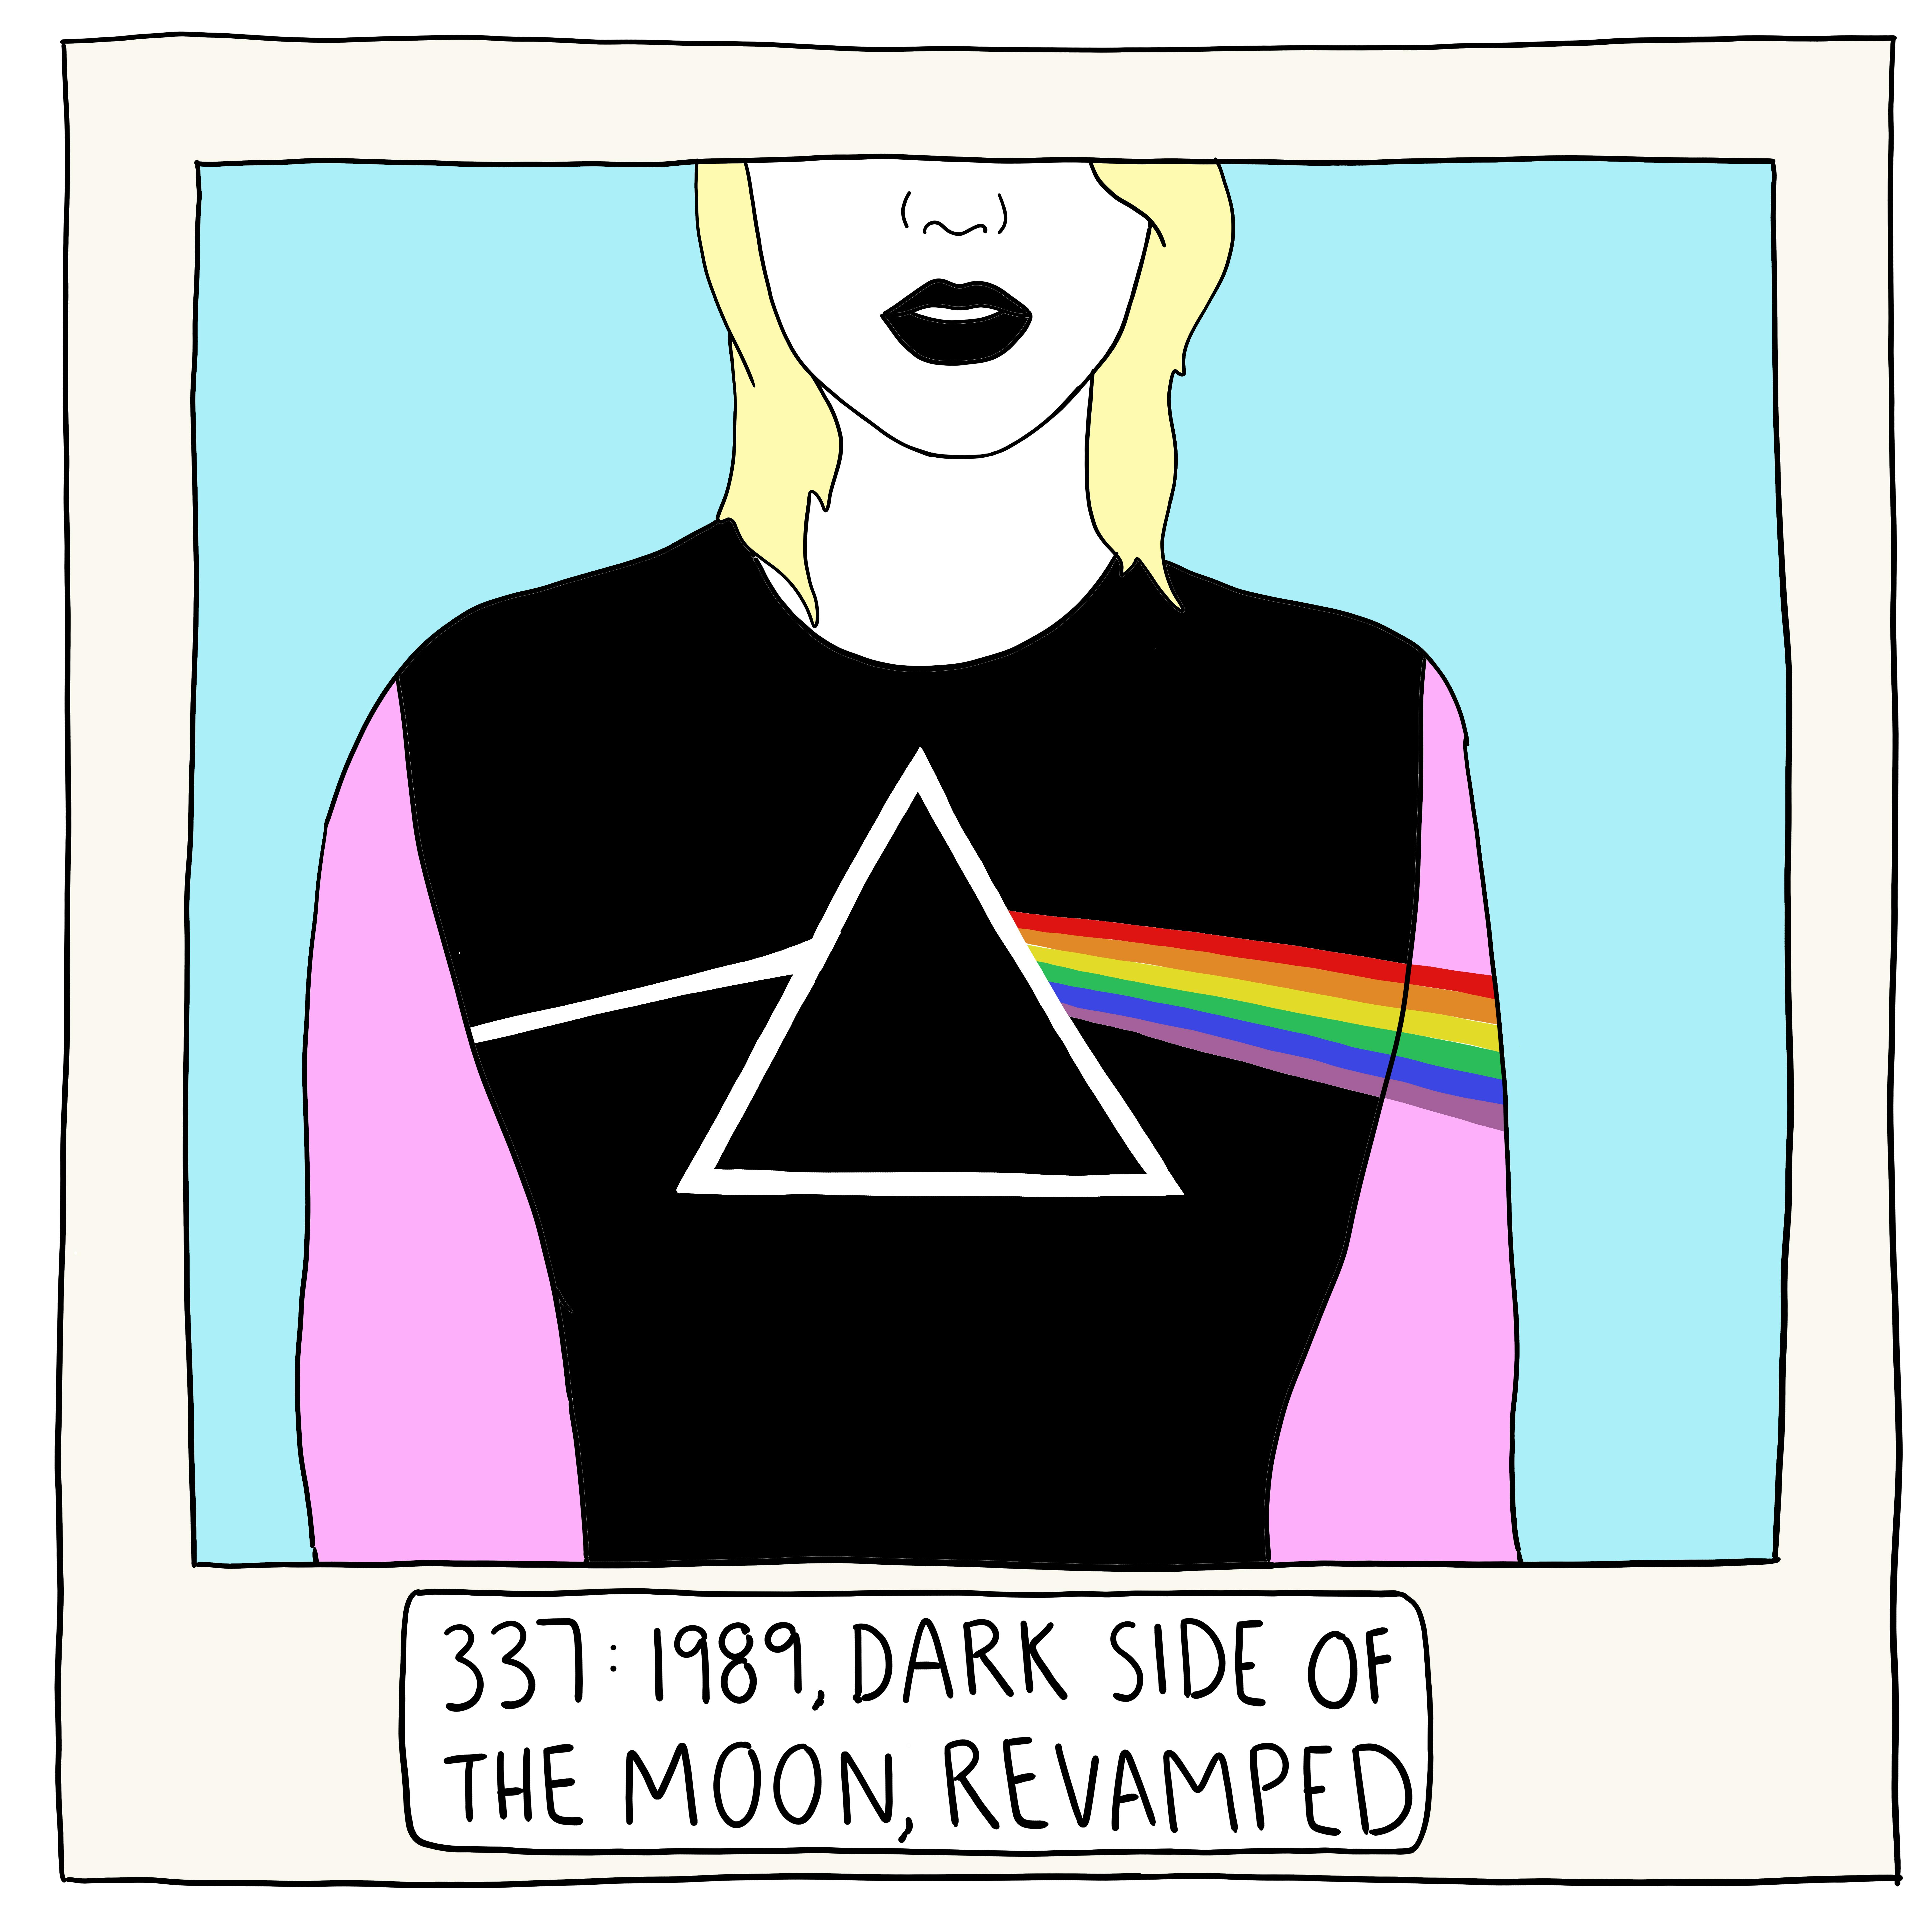 Rerecording Taylor Swift’s 1989, Dark Side of the Moon, and Demi Lovato